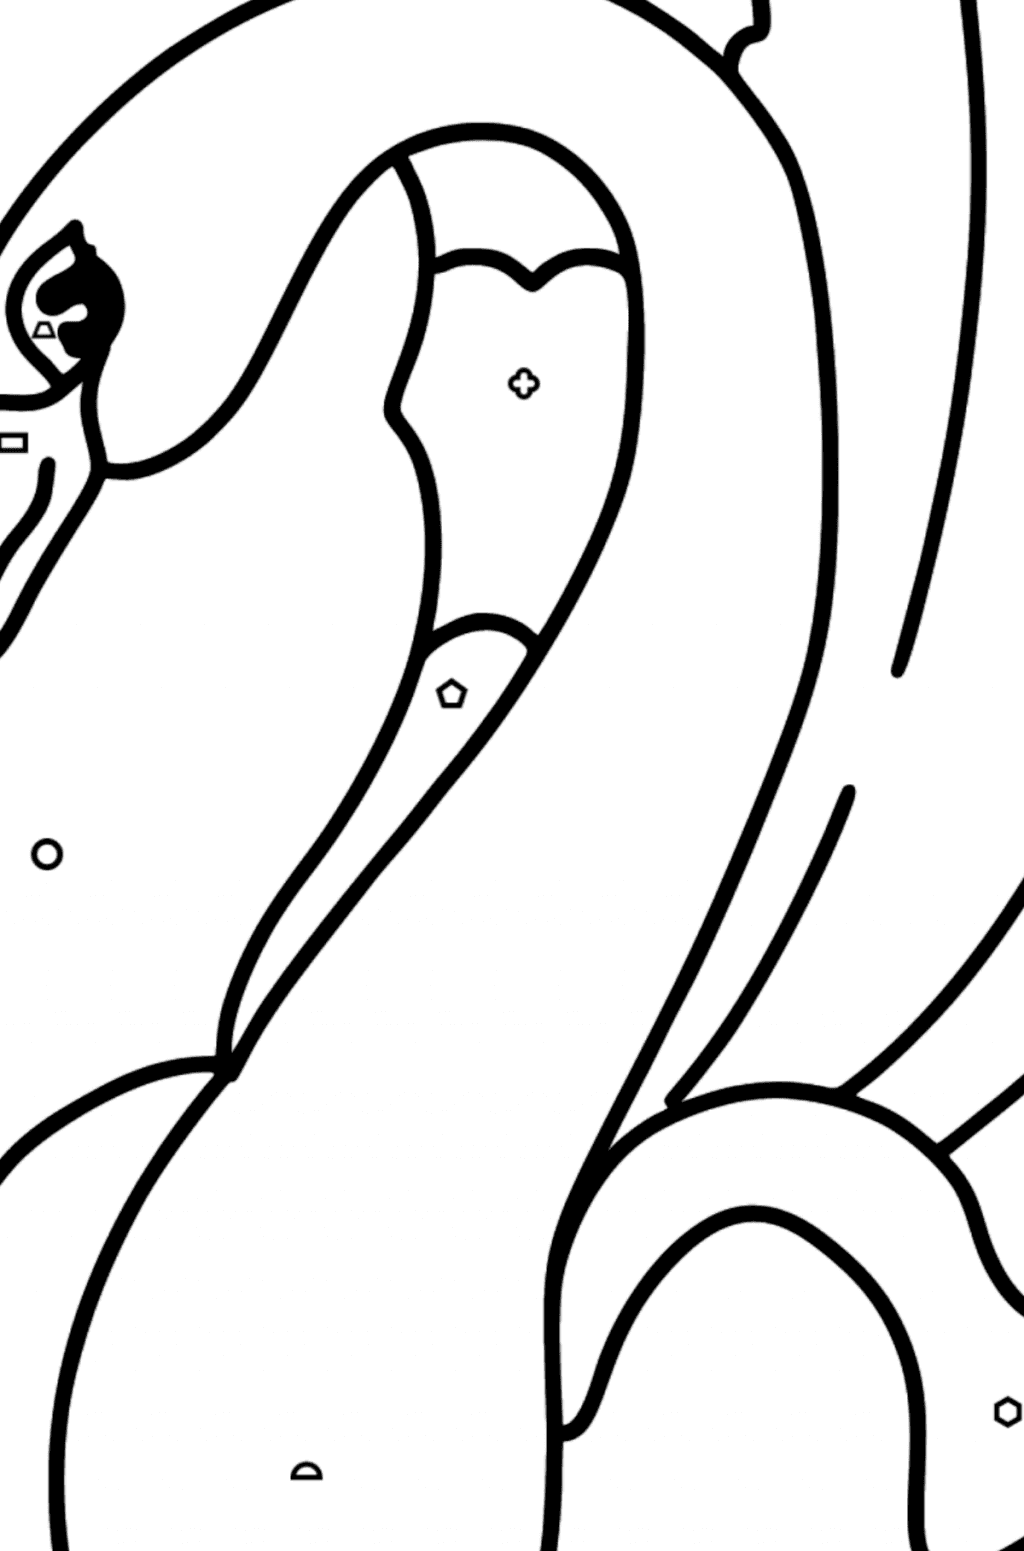 Black Swan coloring page ♥ Online or Printable for Free!